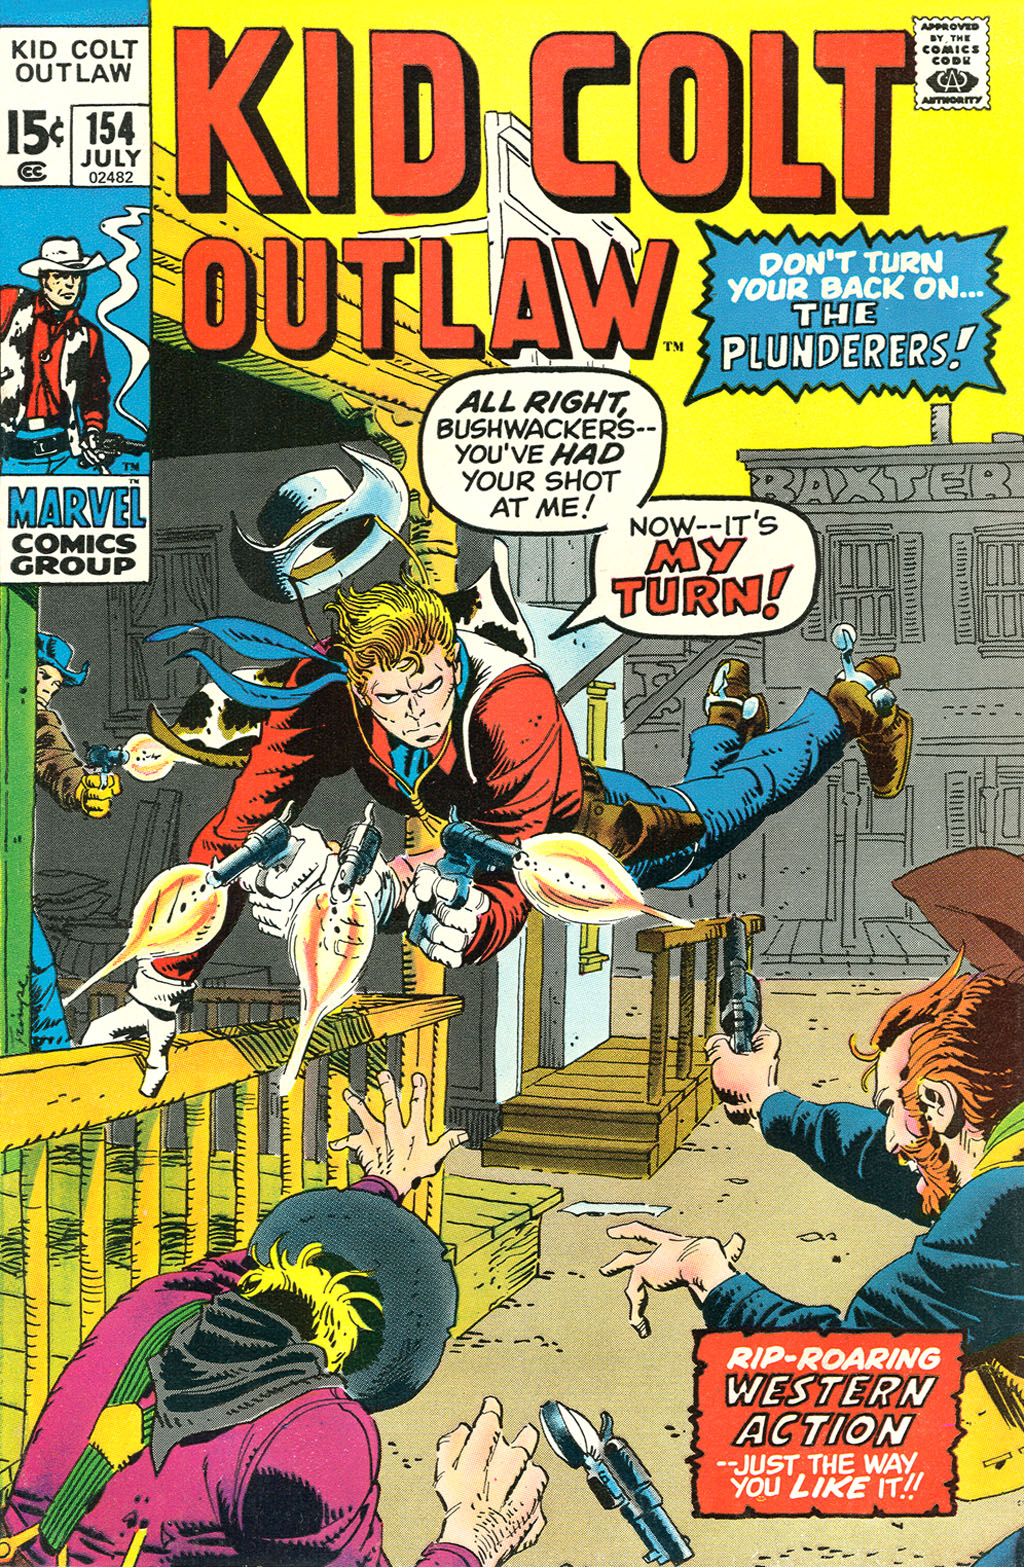 Read online Kid Colt Outlaw comic -  Issue #154 - 1